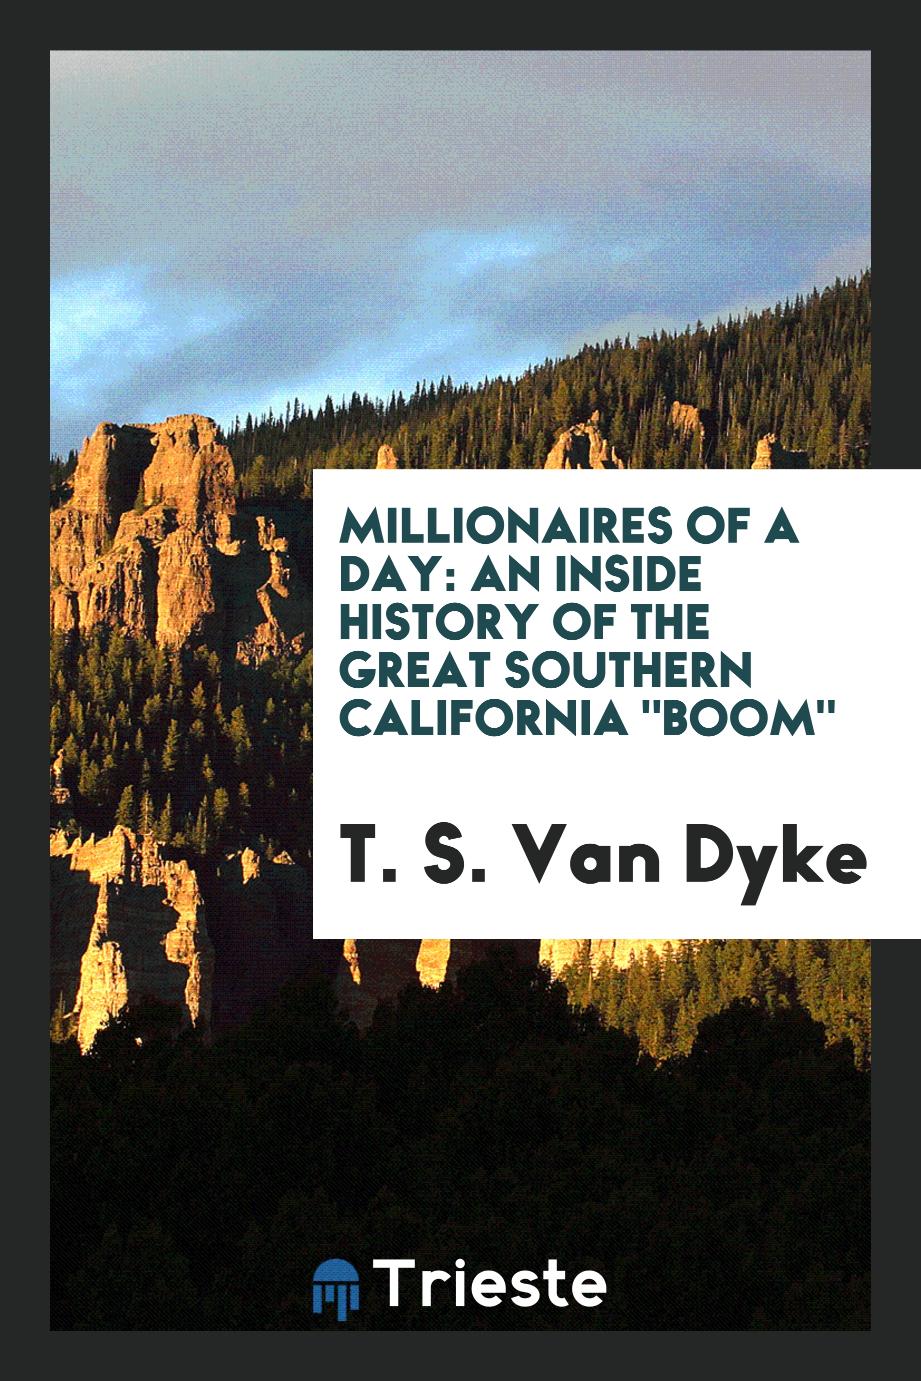 Millionaires of a day: an inside history of the great southern California "boom"